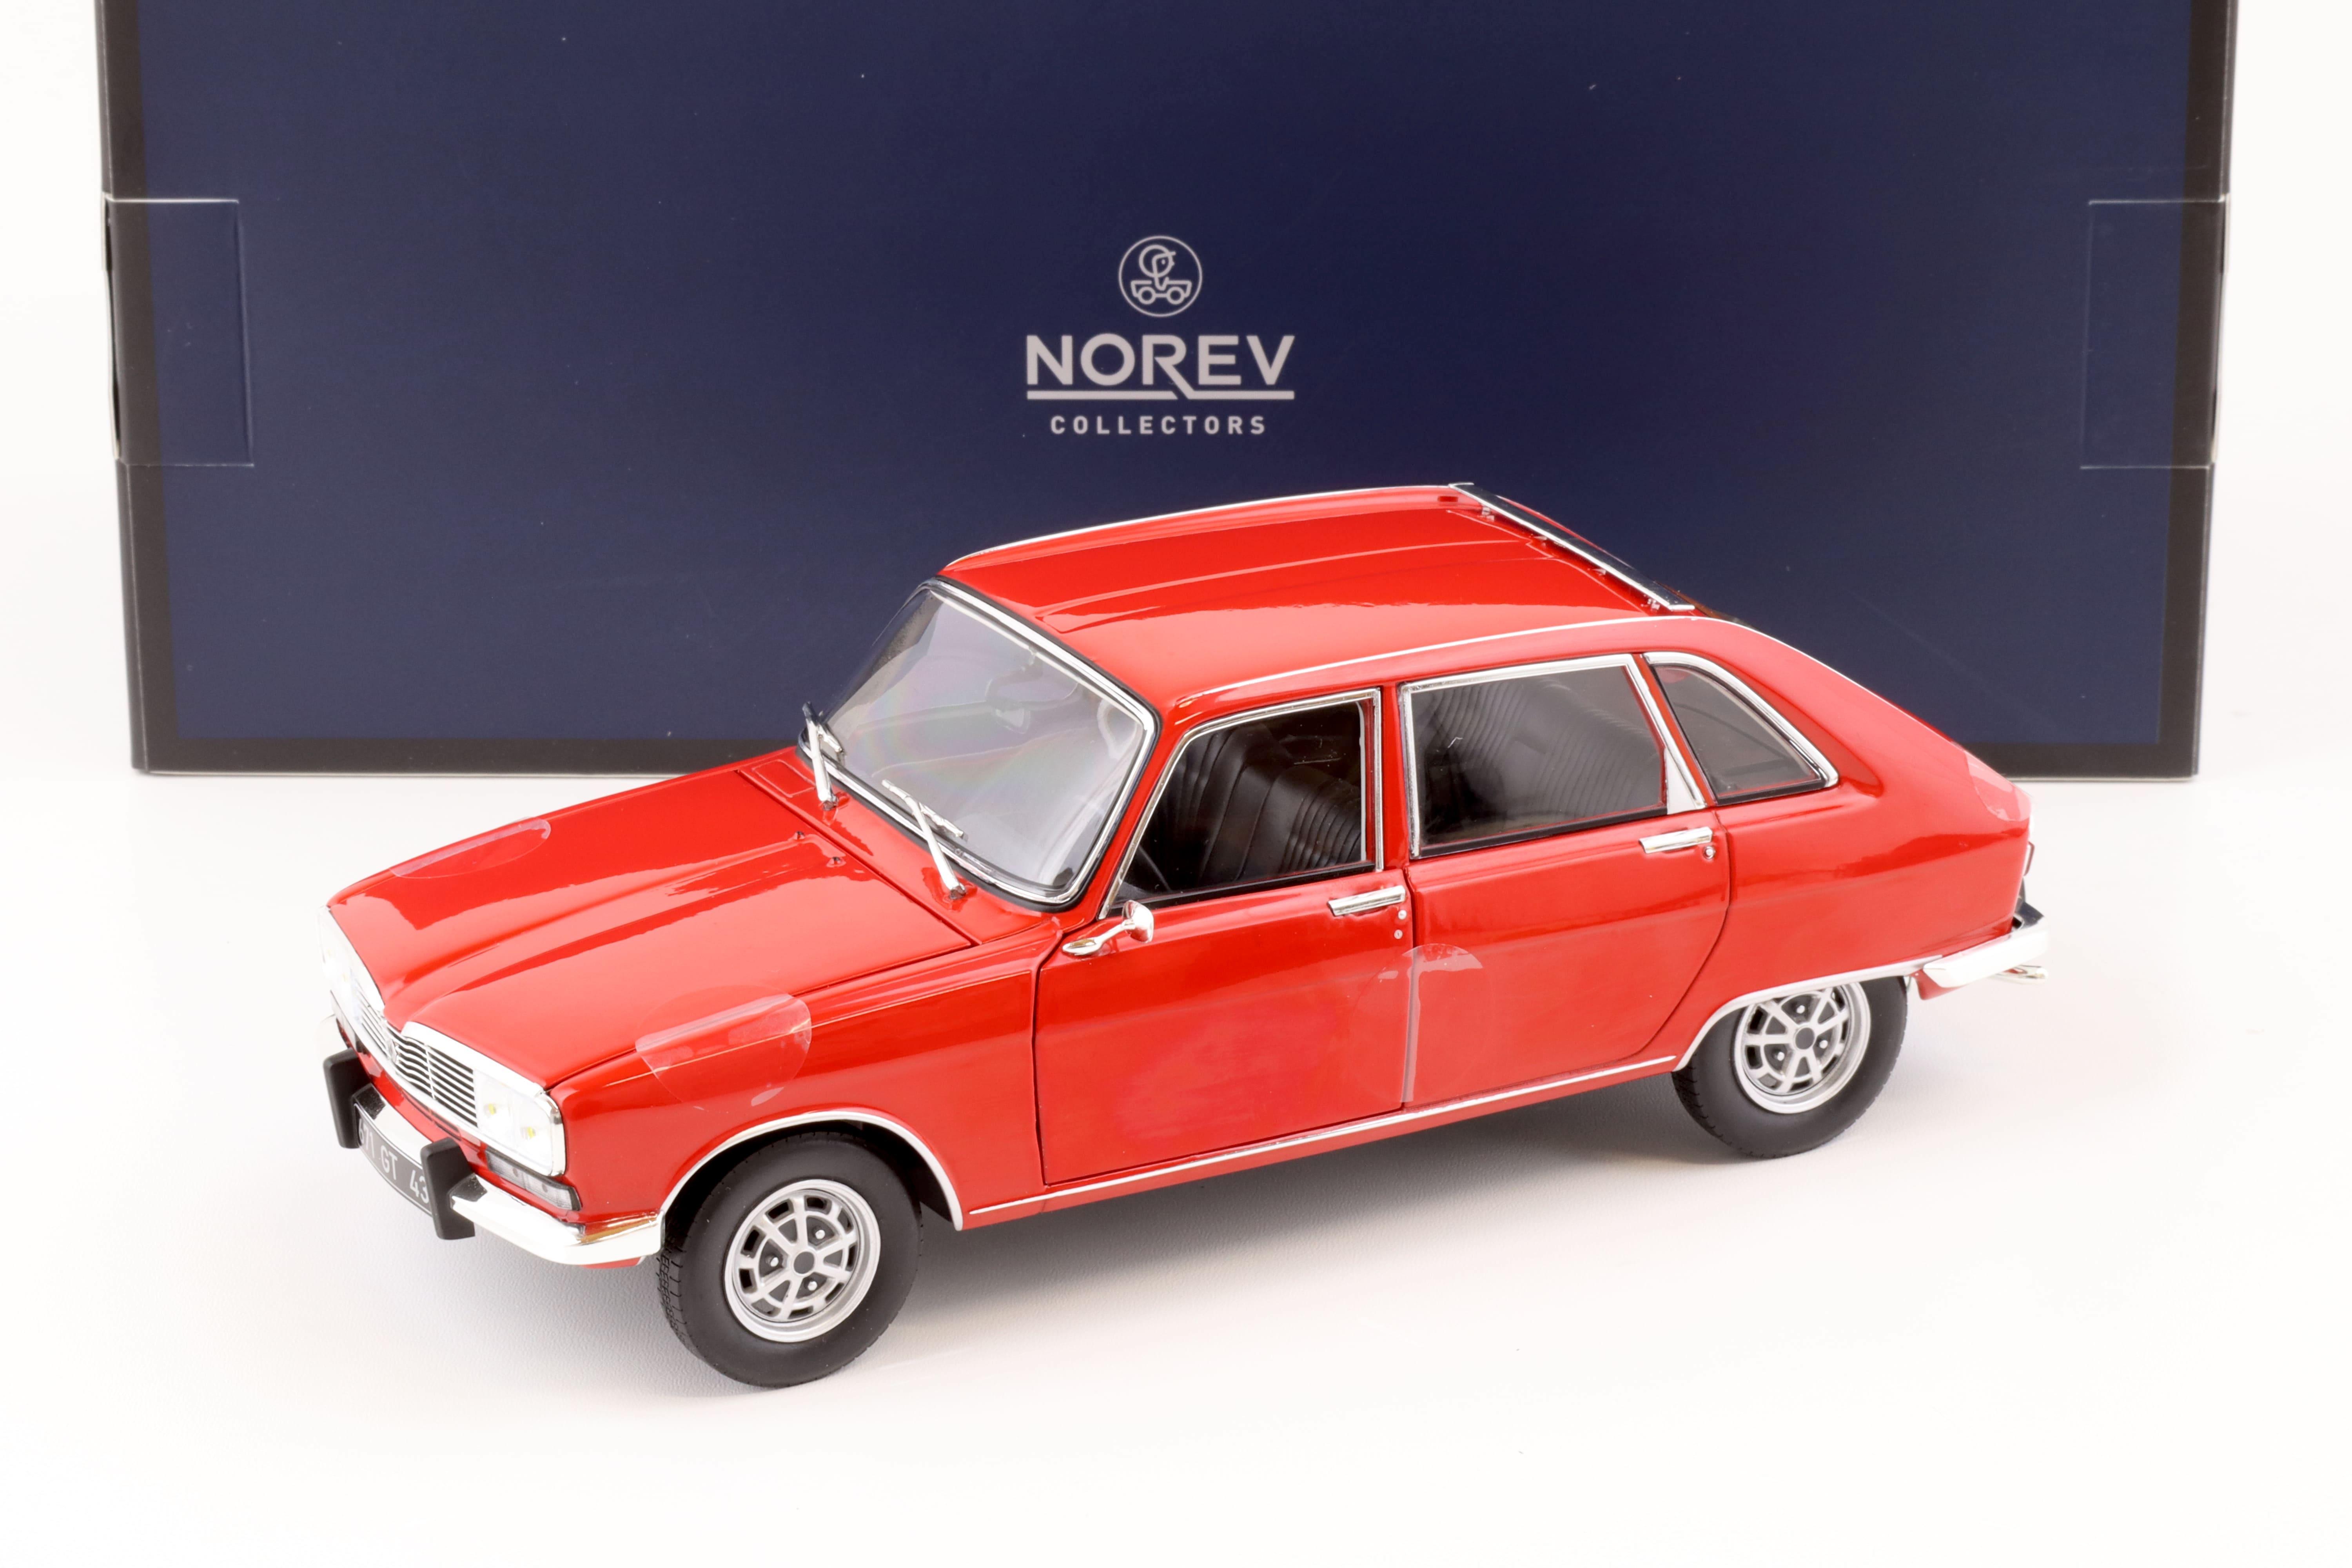 1:18 Norev Renault 16 TX 1975 red - Limited 250 pcs.